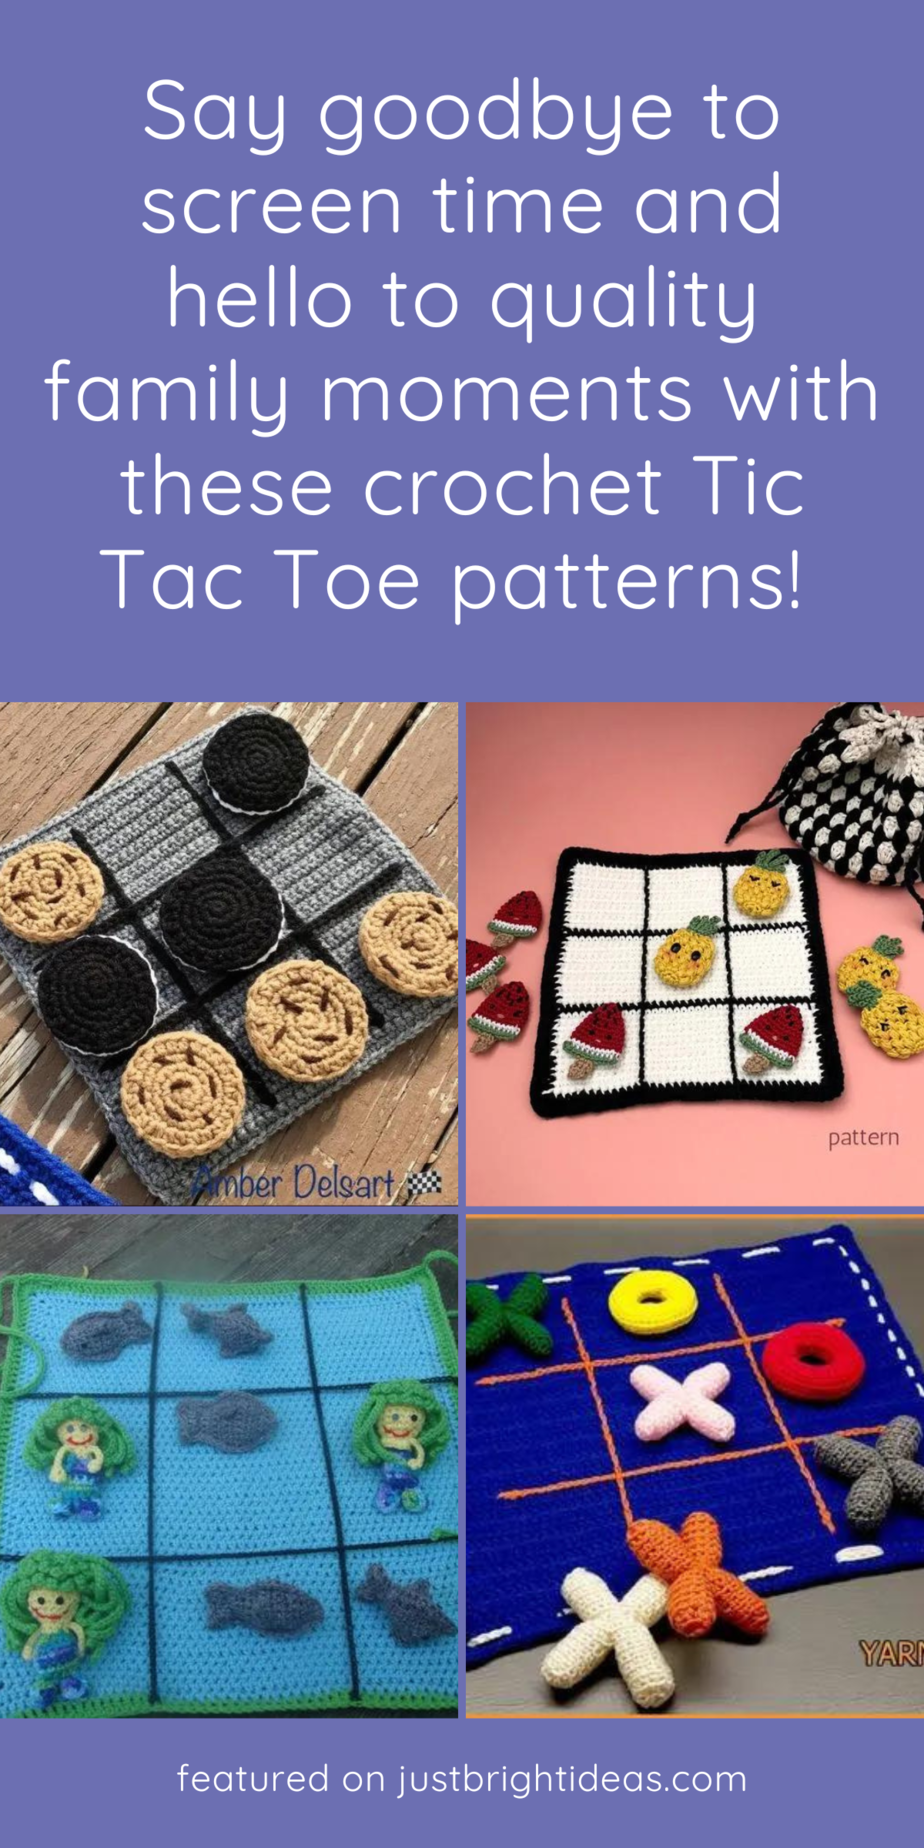 ✨🧶 Bring the family together with these adorable crochet Tic Tac Toe games! Easy to make and fun to play at home or away, they're perfect for all ages to make memories together!